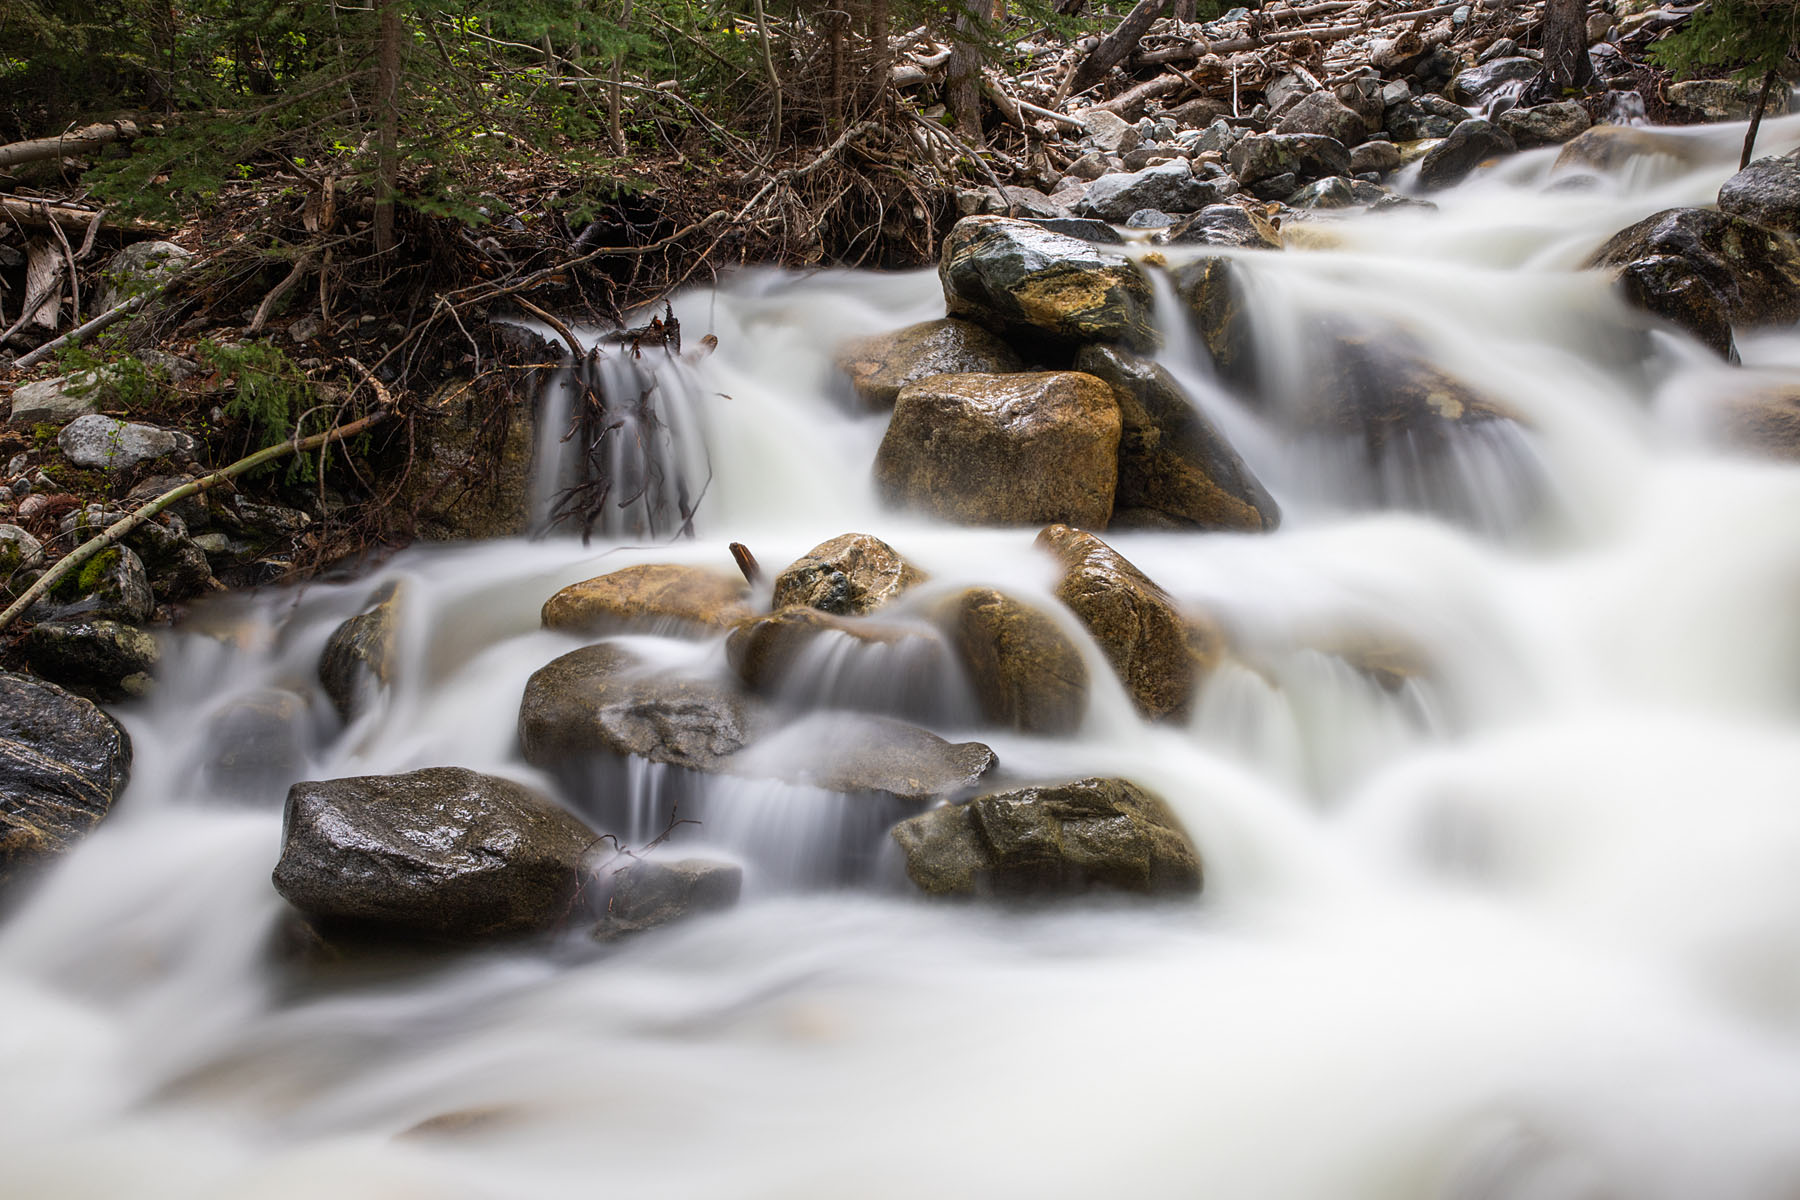 Snow Creek in the national forest,. Exposure 10 seconds, neutral density filter.  Click for next photo.